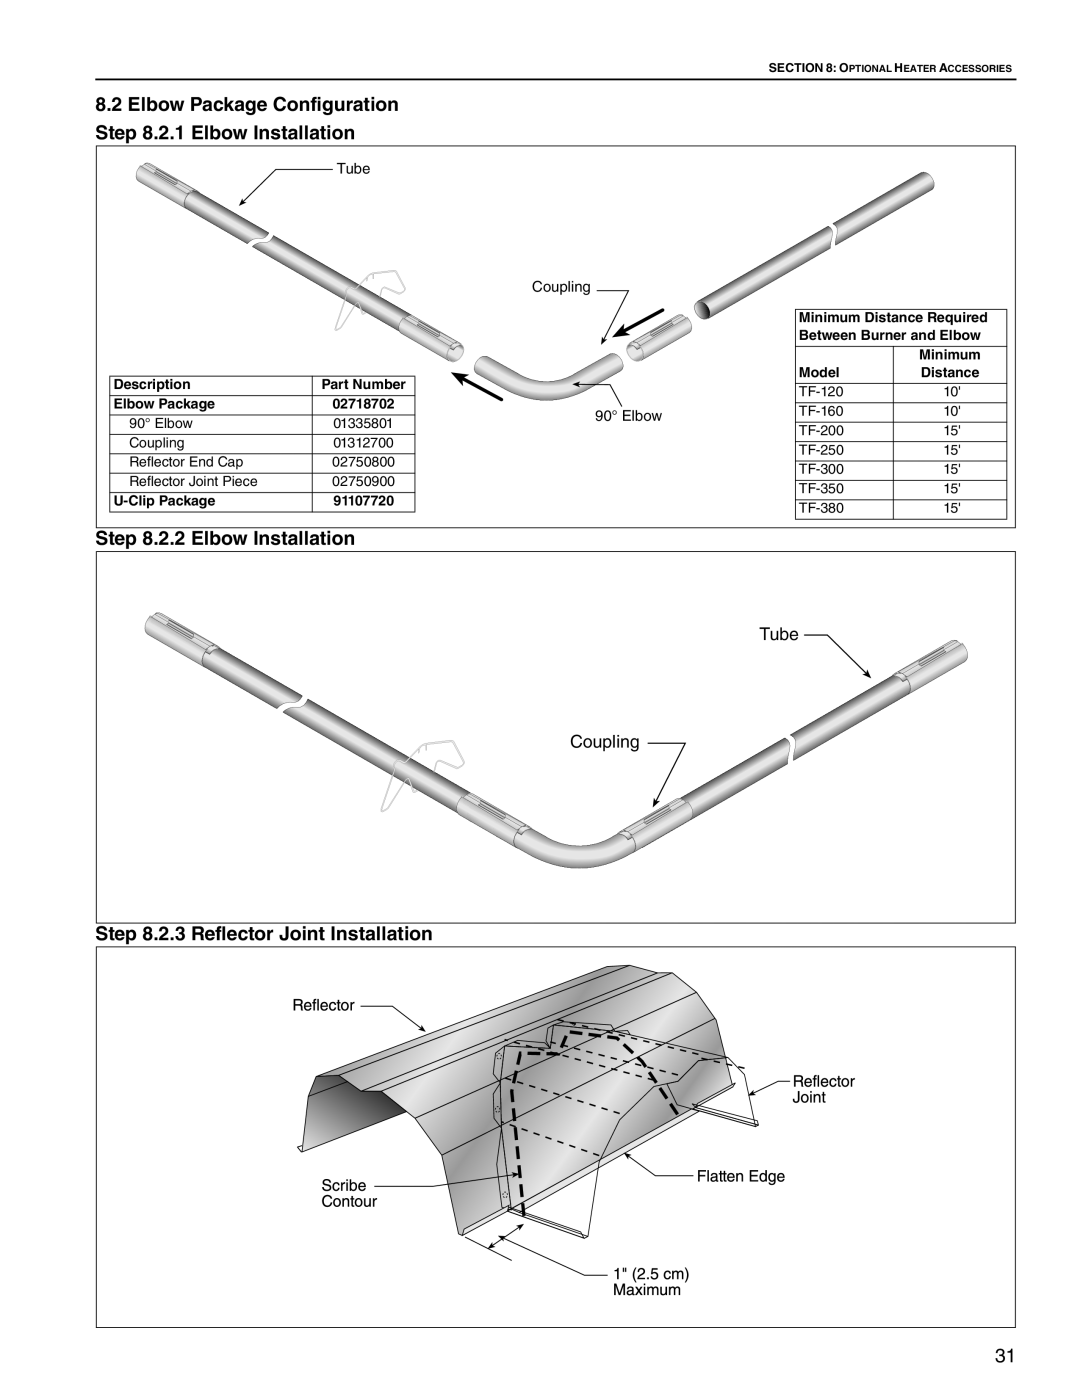 Roberts Gorden TF-120 Elbow Package Configuration, 2.1 Elbow Installation, 2.2 Elbow Installation, Description, Model 